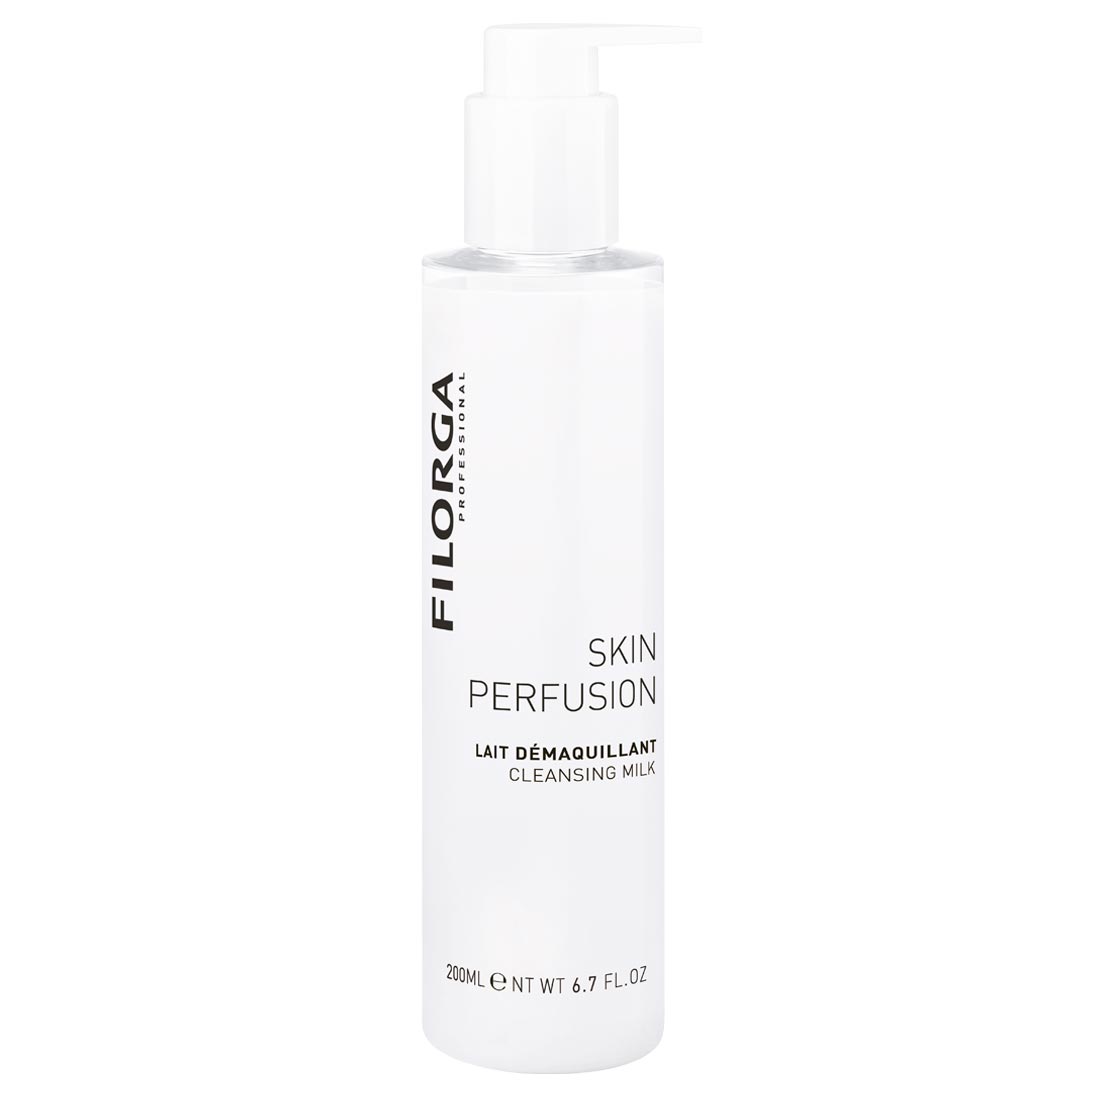 Fillmed Skin Perfusion Cleansing Milk (1 X 200ml)